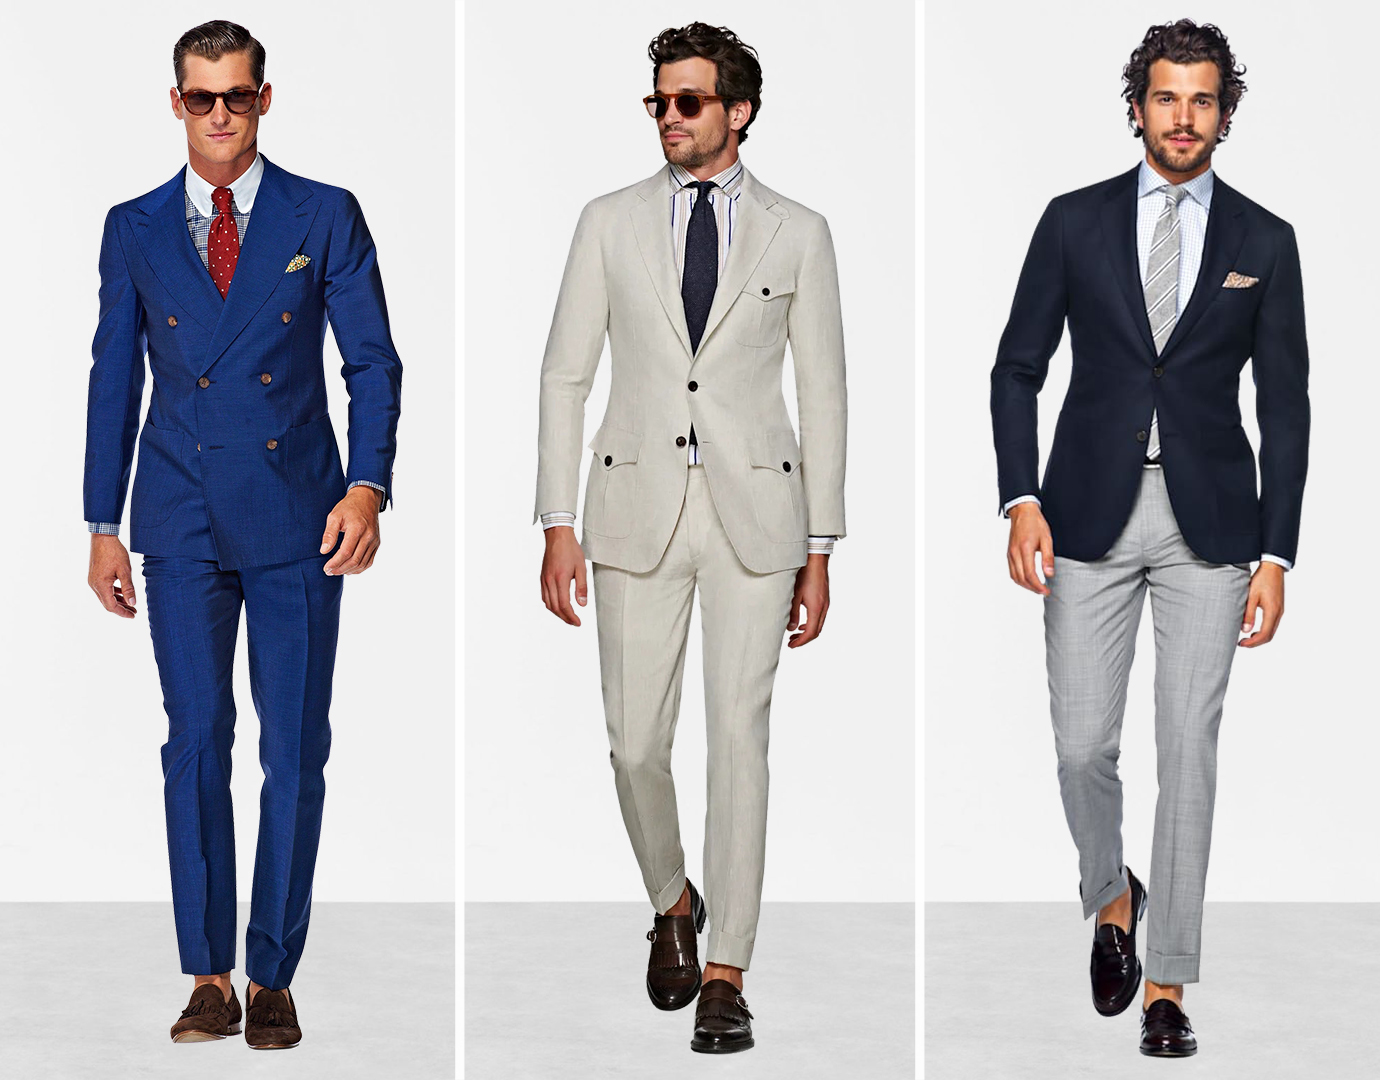 Semi Formal Dress Code Attire For Men Suits Expert,How Long To Cook Pork Chops On The Grill